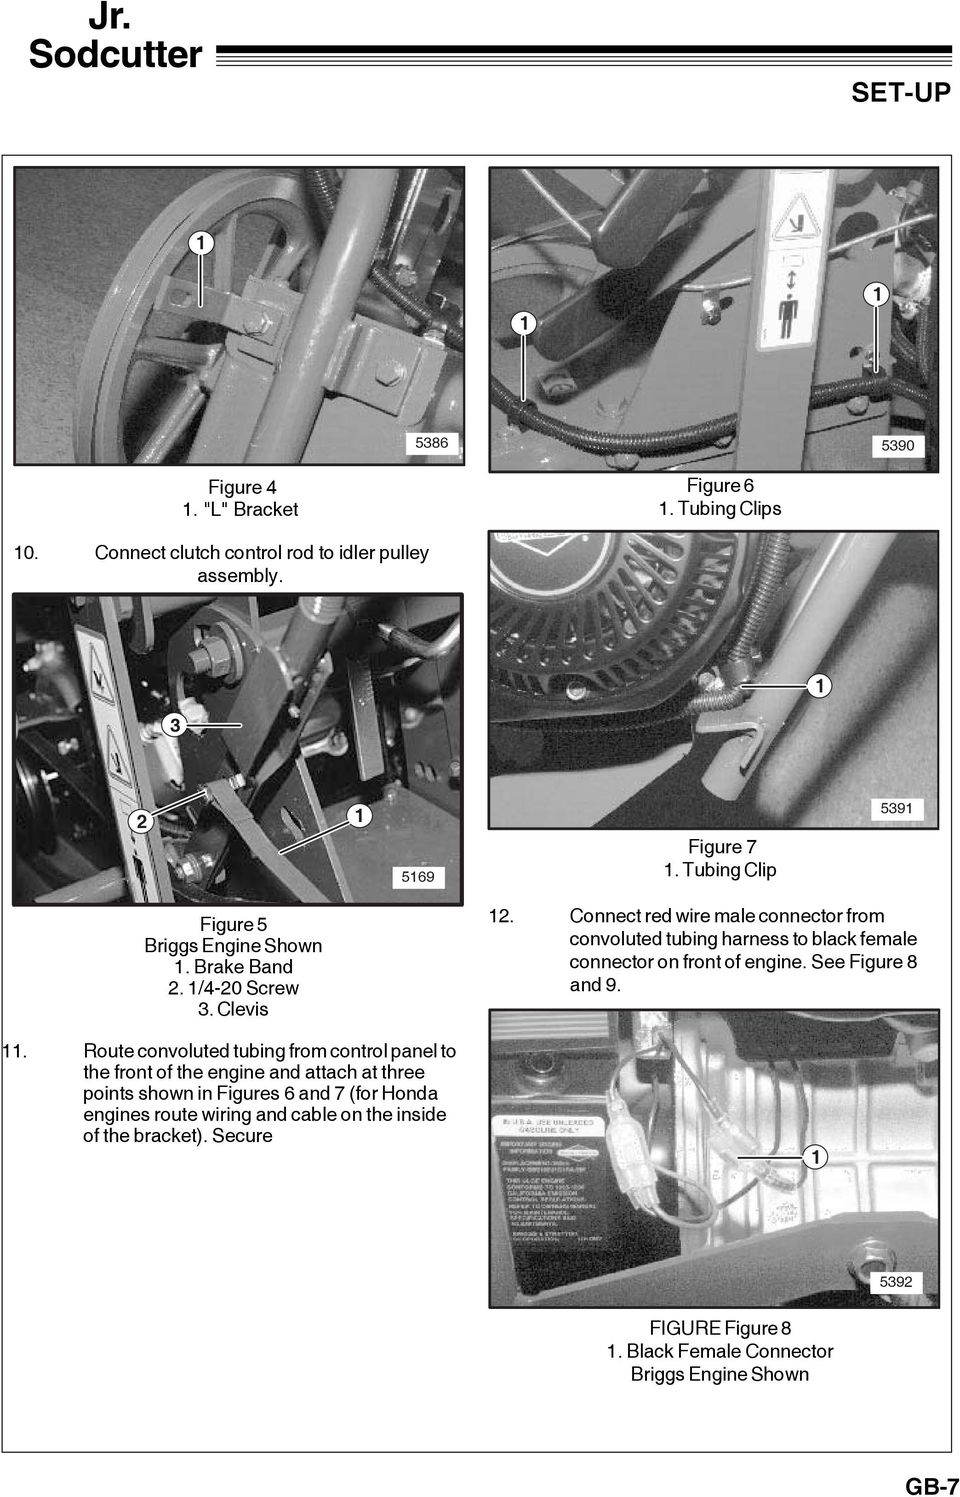 Route convoluted tubing from control panel to the front of the engine and attach at three points shown in Figures 6 and 7 (for Honda engines route wiring